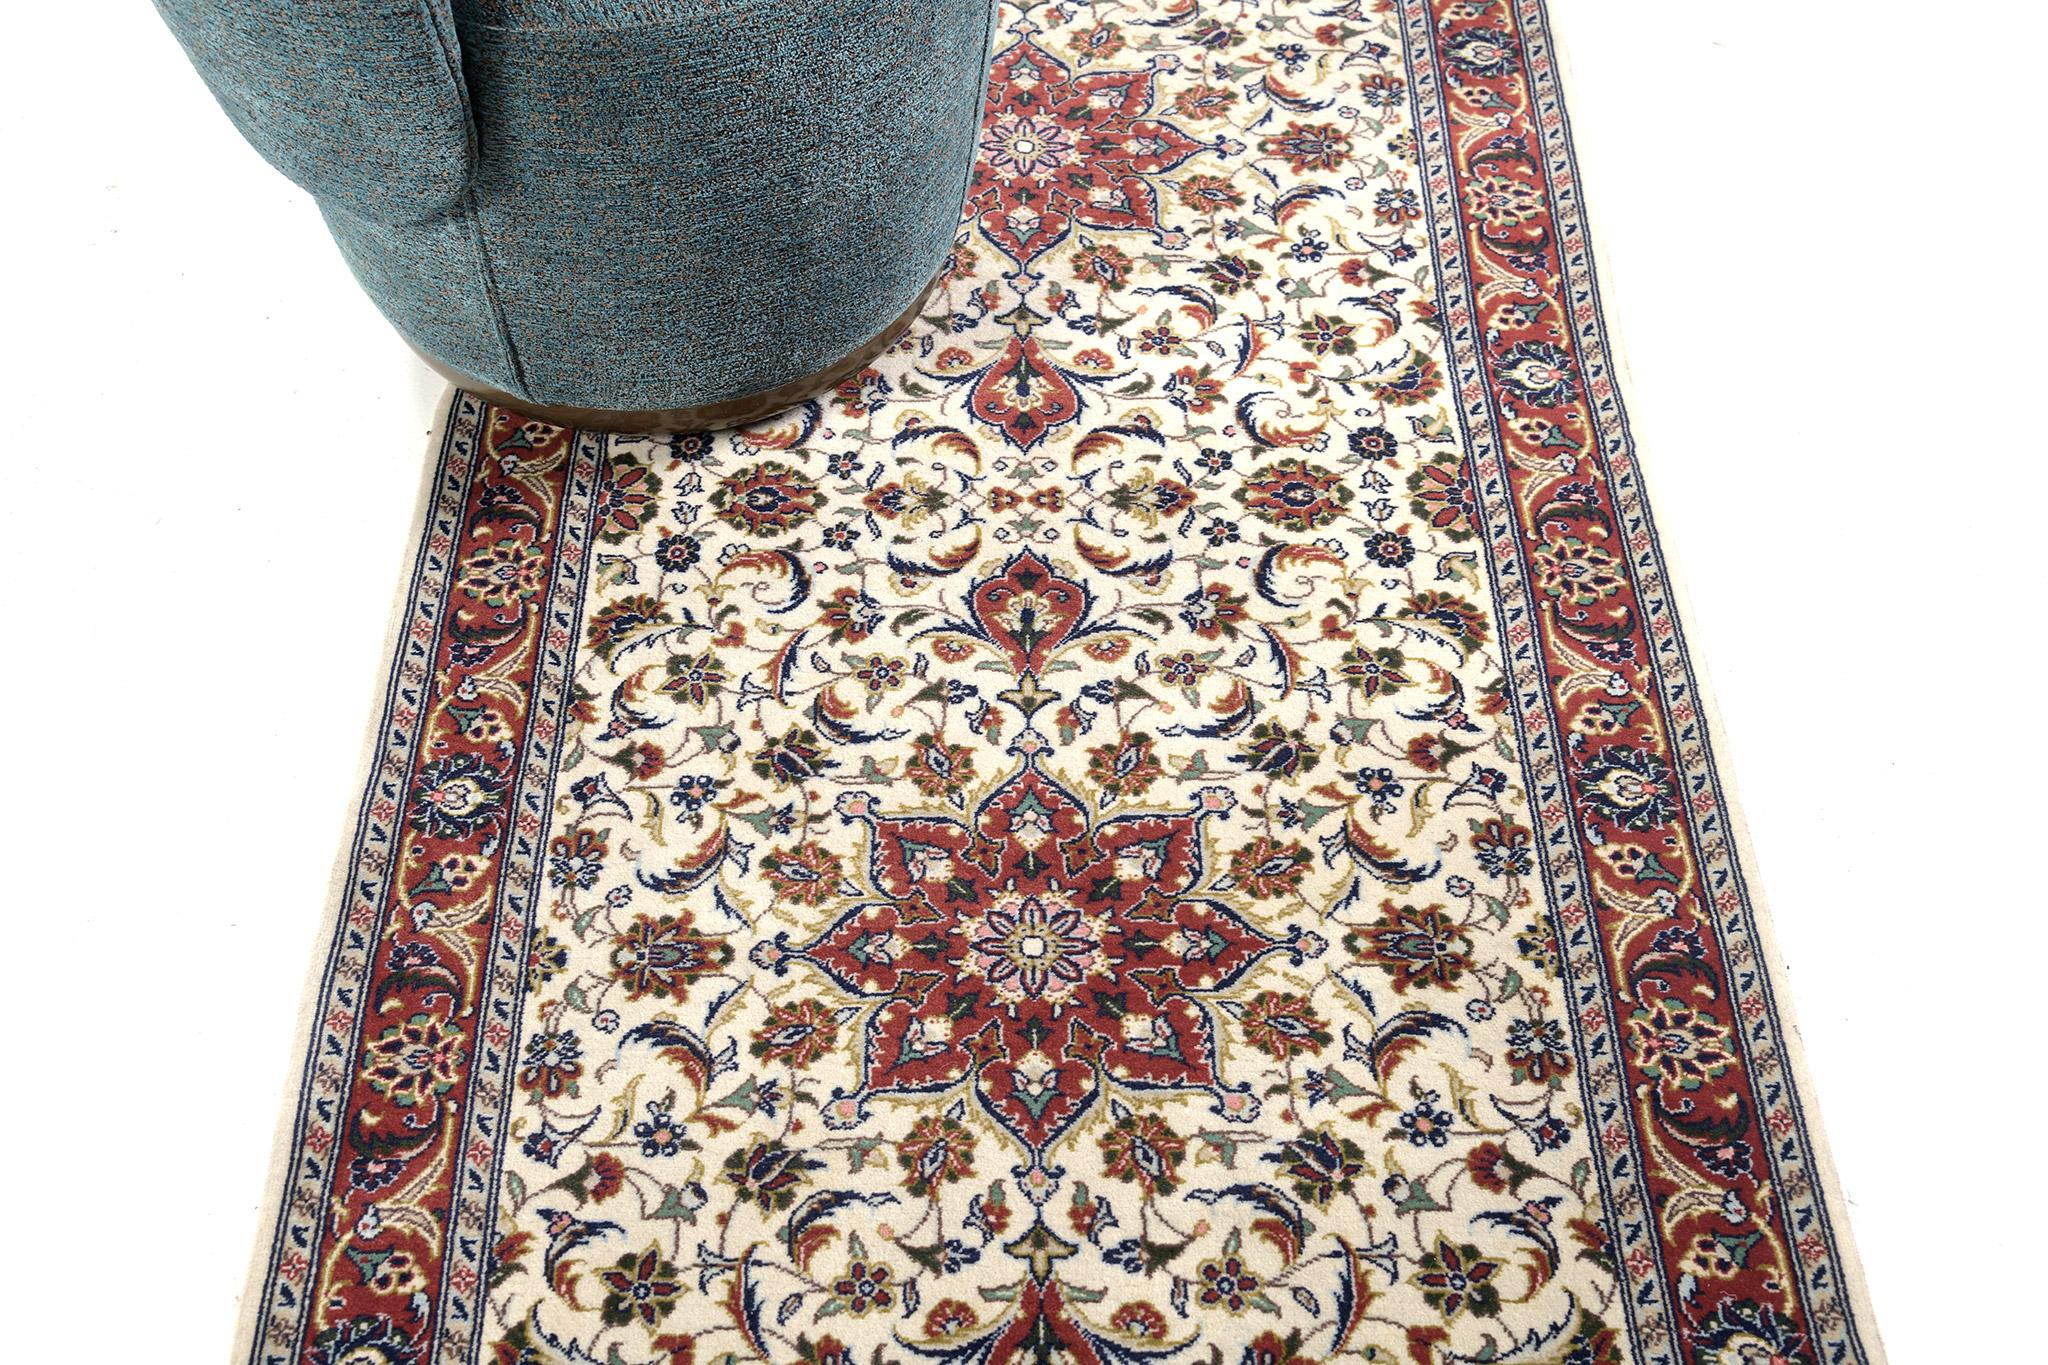 A magnificent Vintage Persian Kashan rug that features a breathtaking impact from its every square inch design. This wonderful rug majestically presents a series of rosette medallions laying across the botanical field of various symmetrical florid